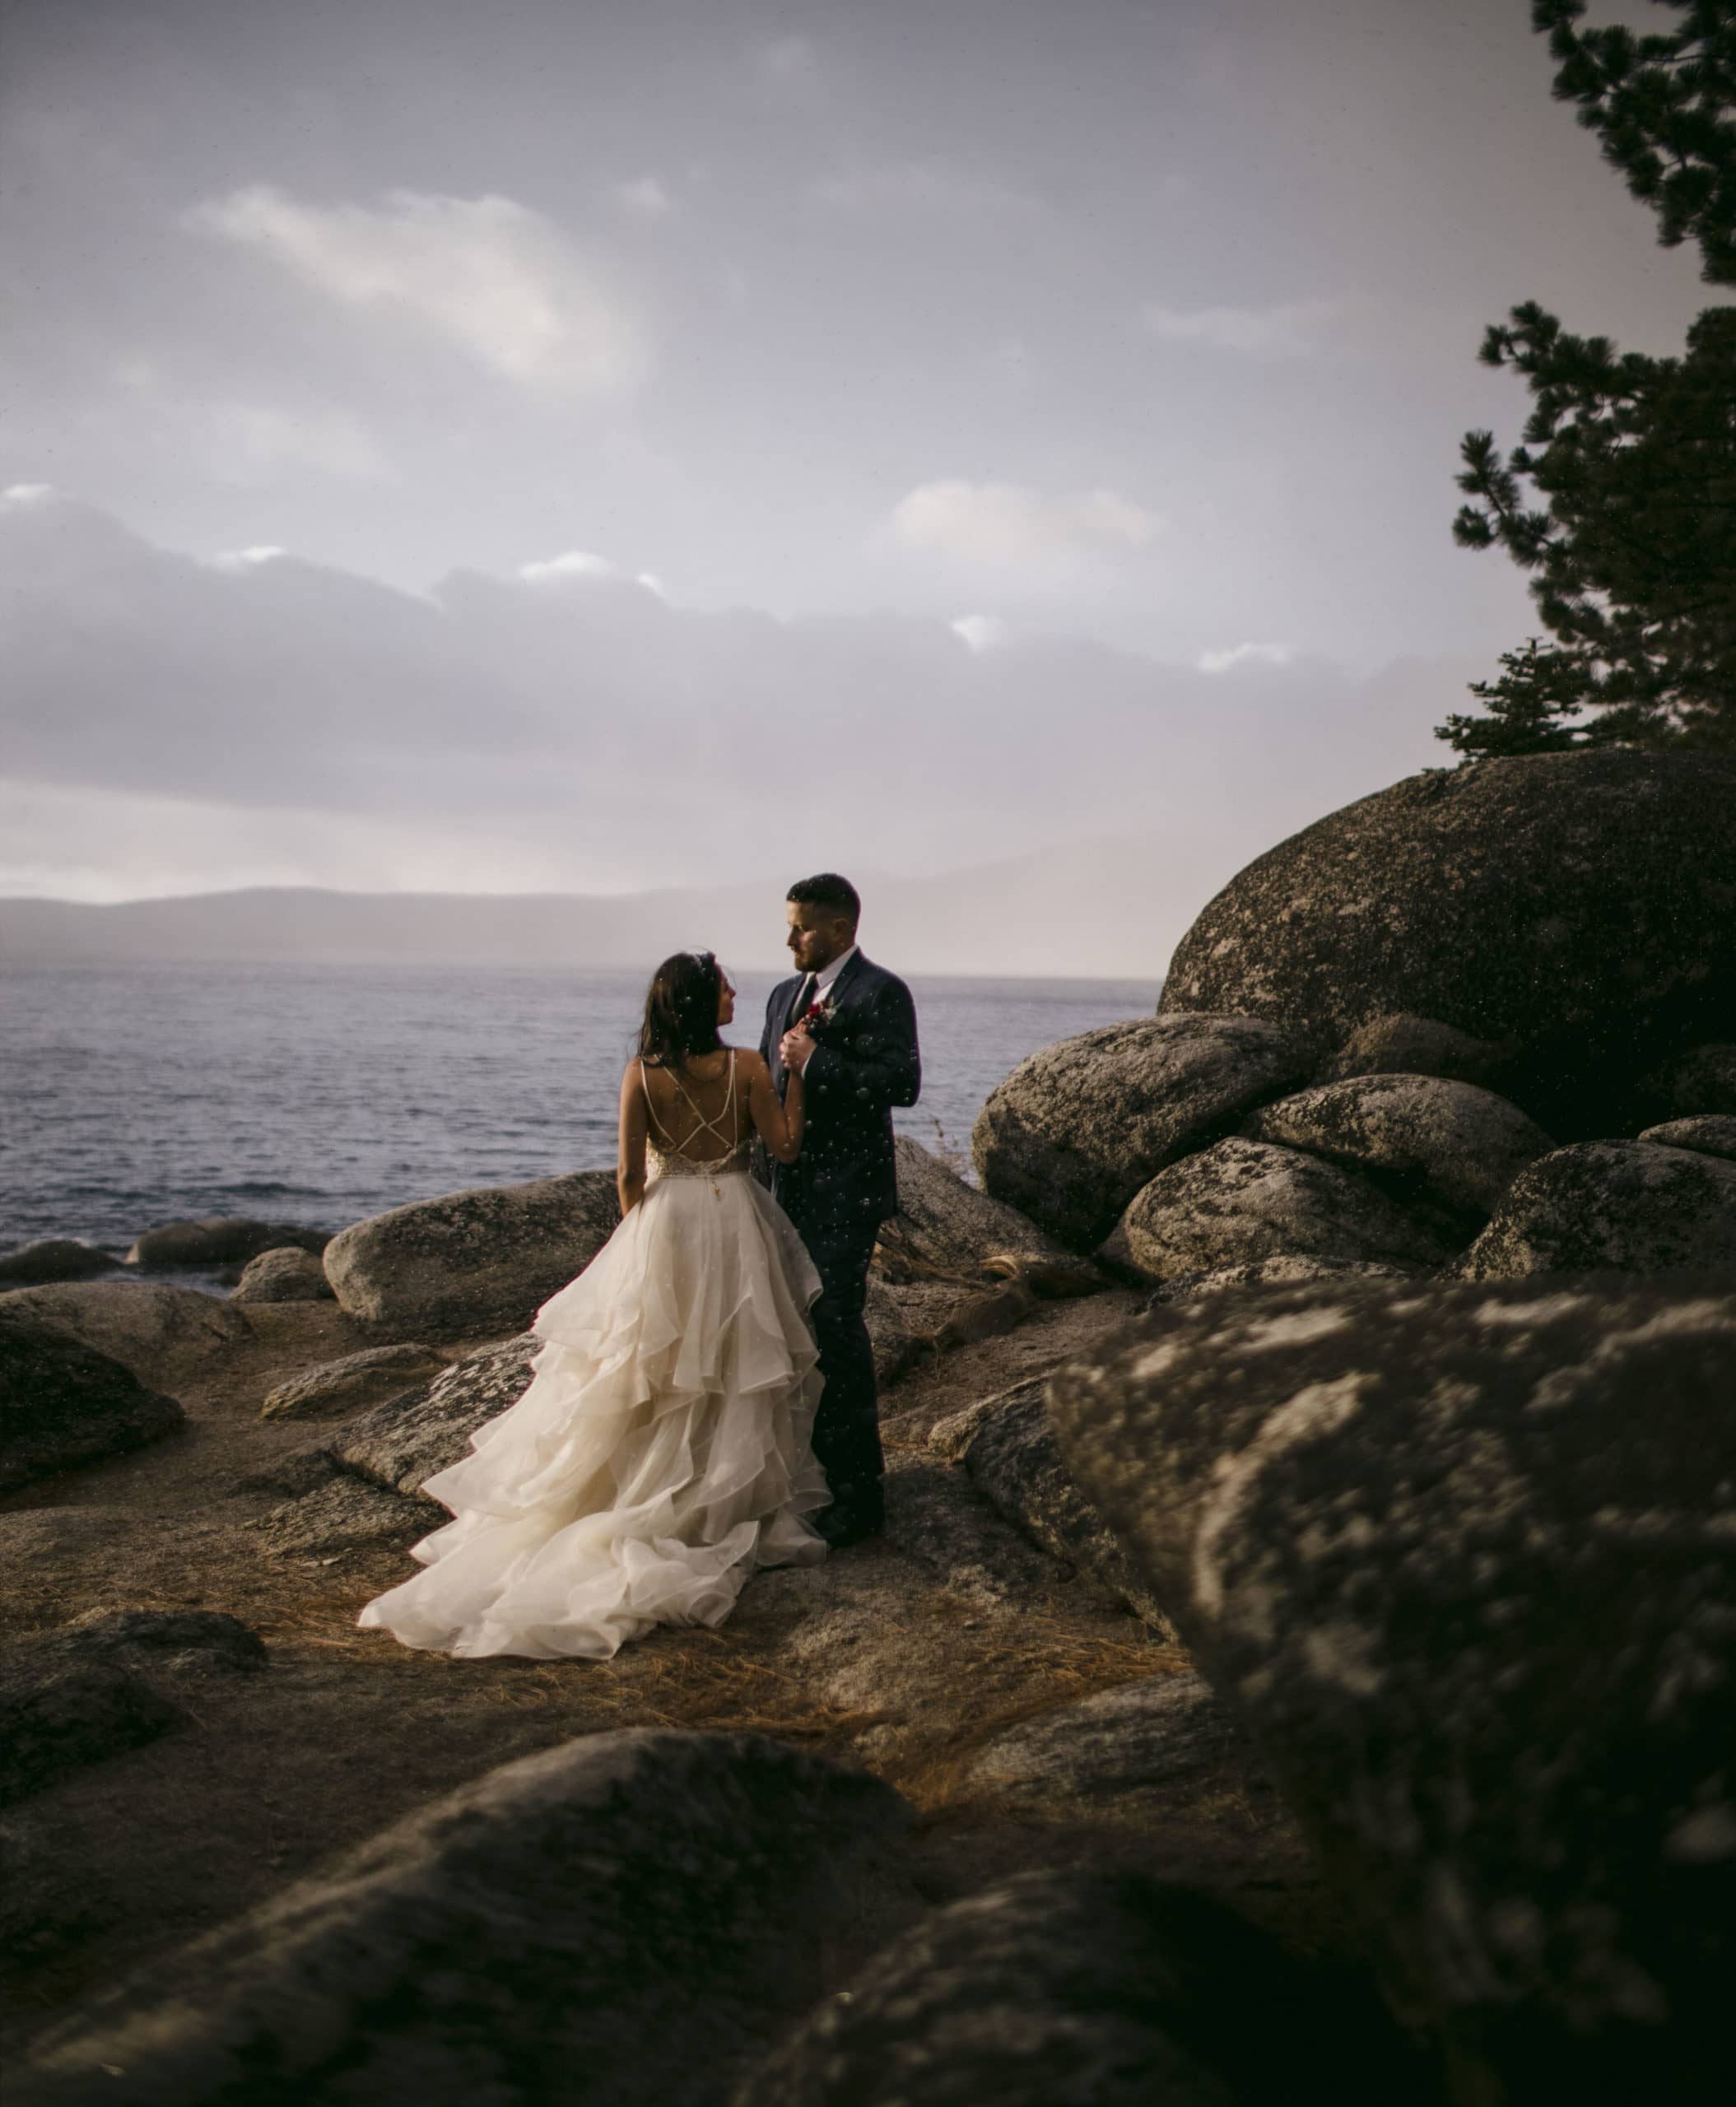 A couple that decided to create a intimate elopement timeline in Big Sur.